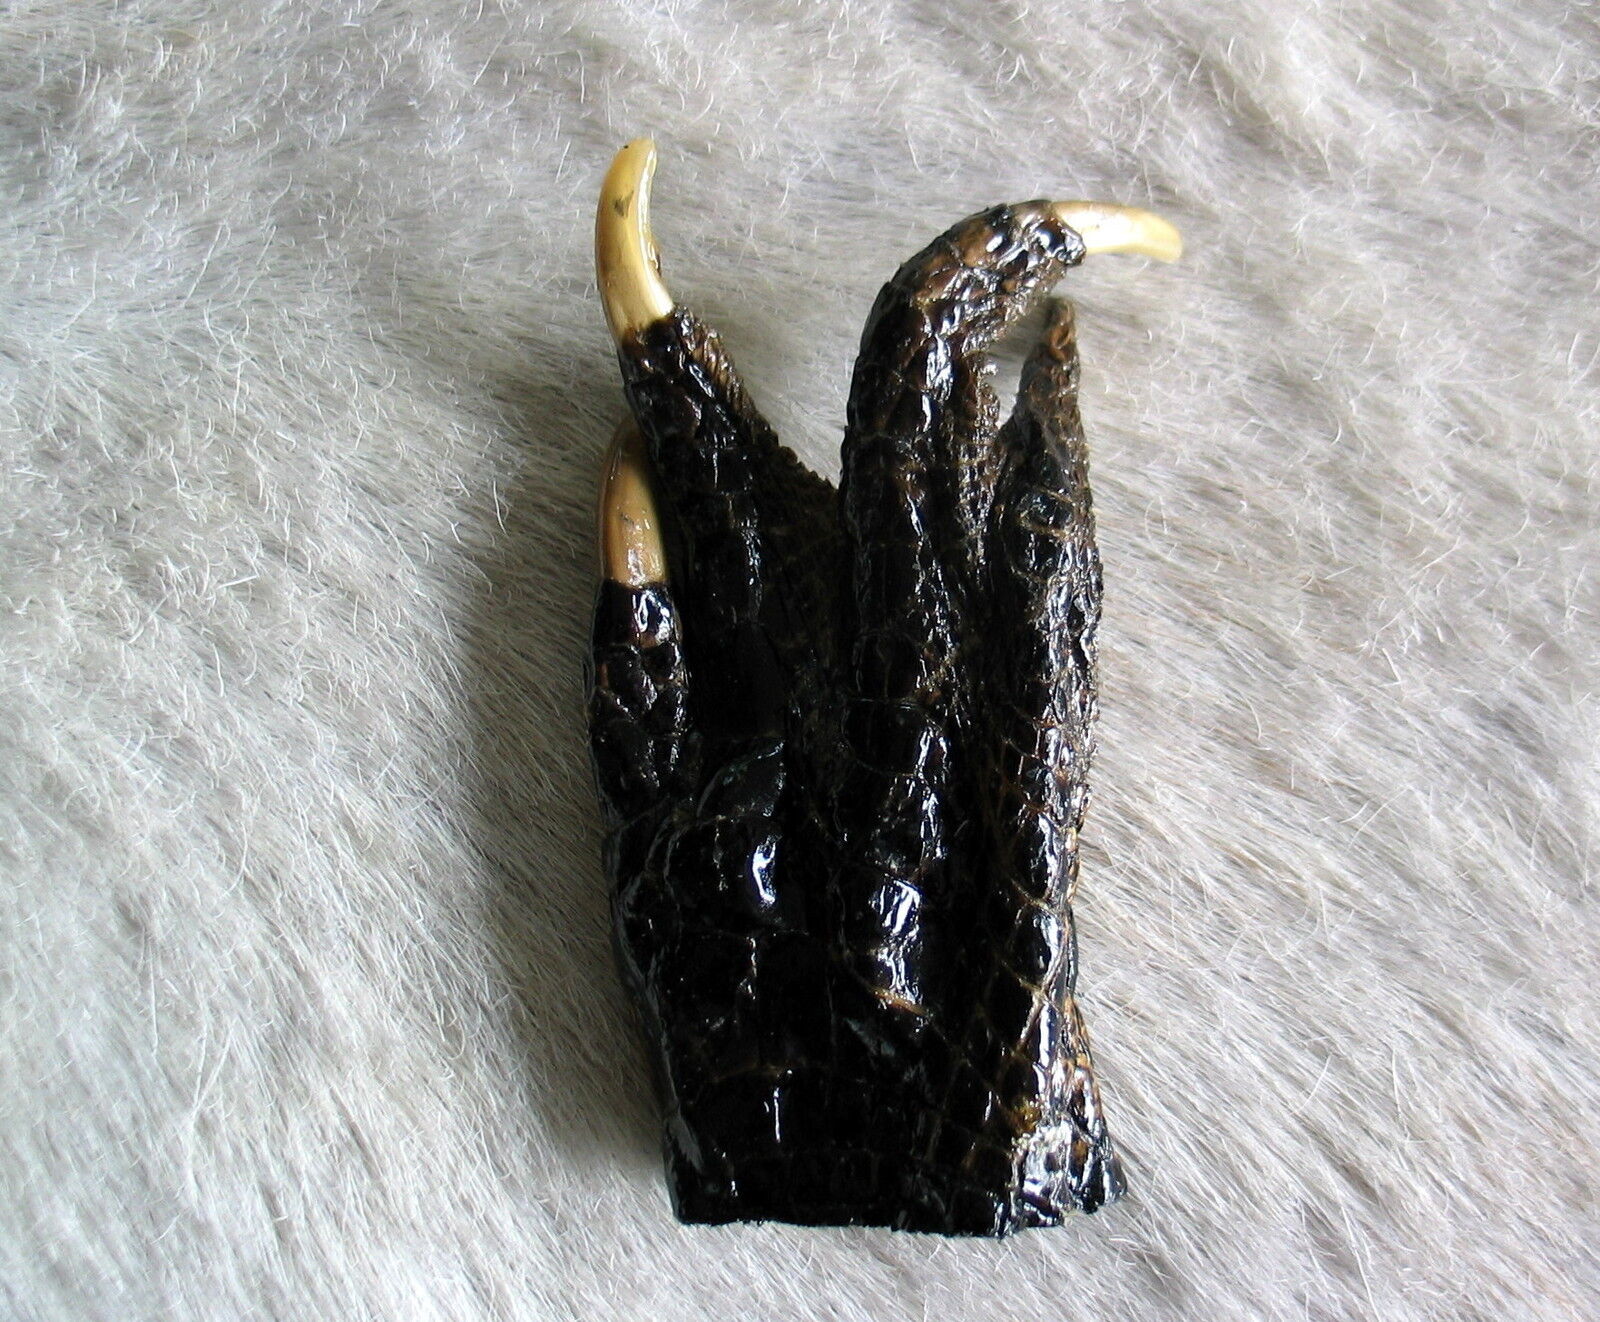 UNUSUAL ALLIGATOR FOOT COLLECTIBLE TAXIDERMY STAR TREK LIVE LONG AND PROSPER 2